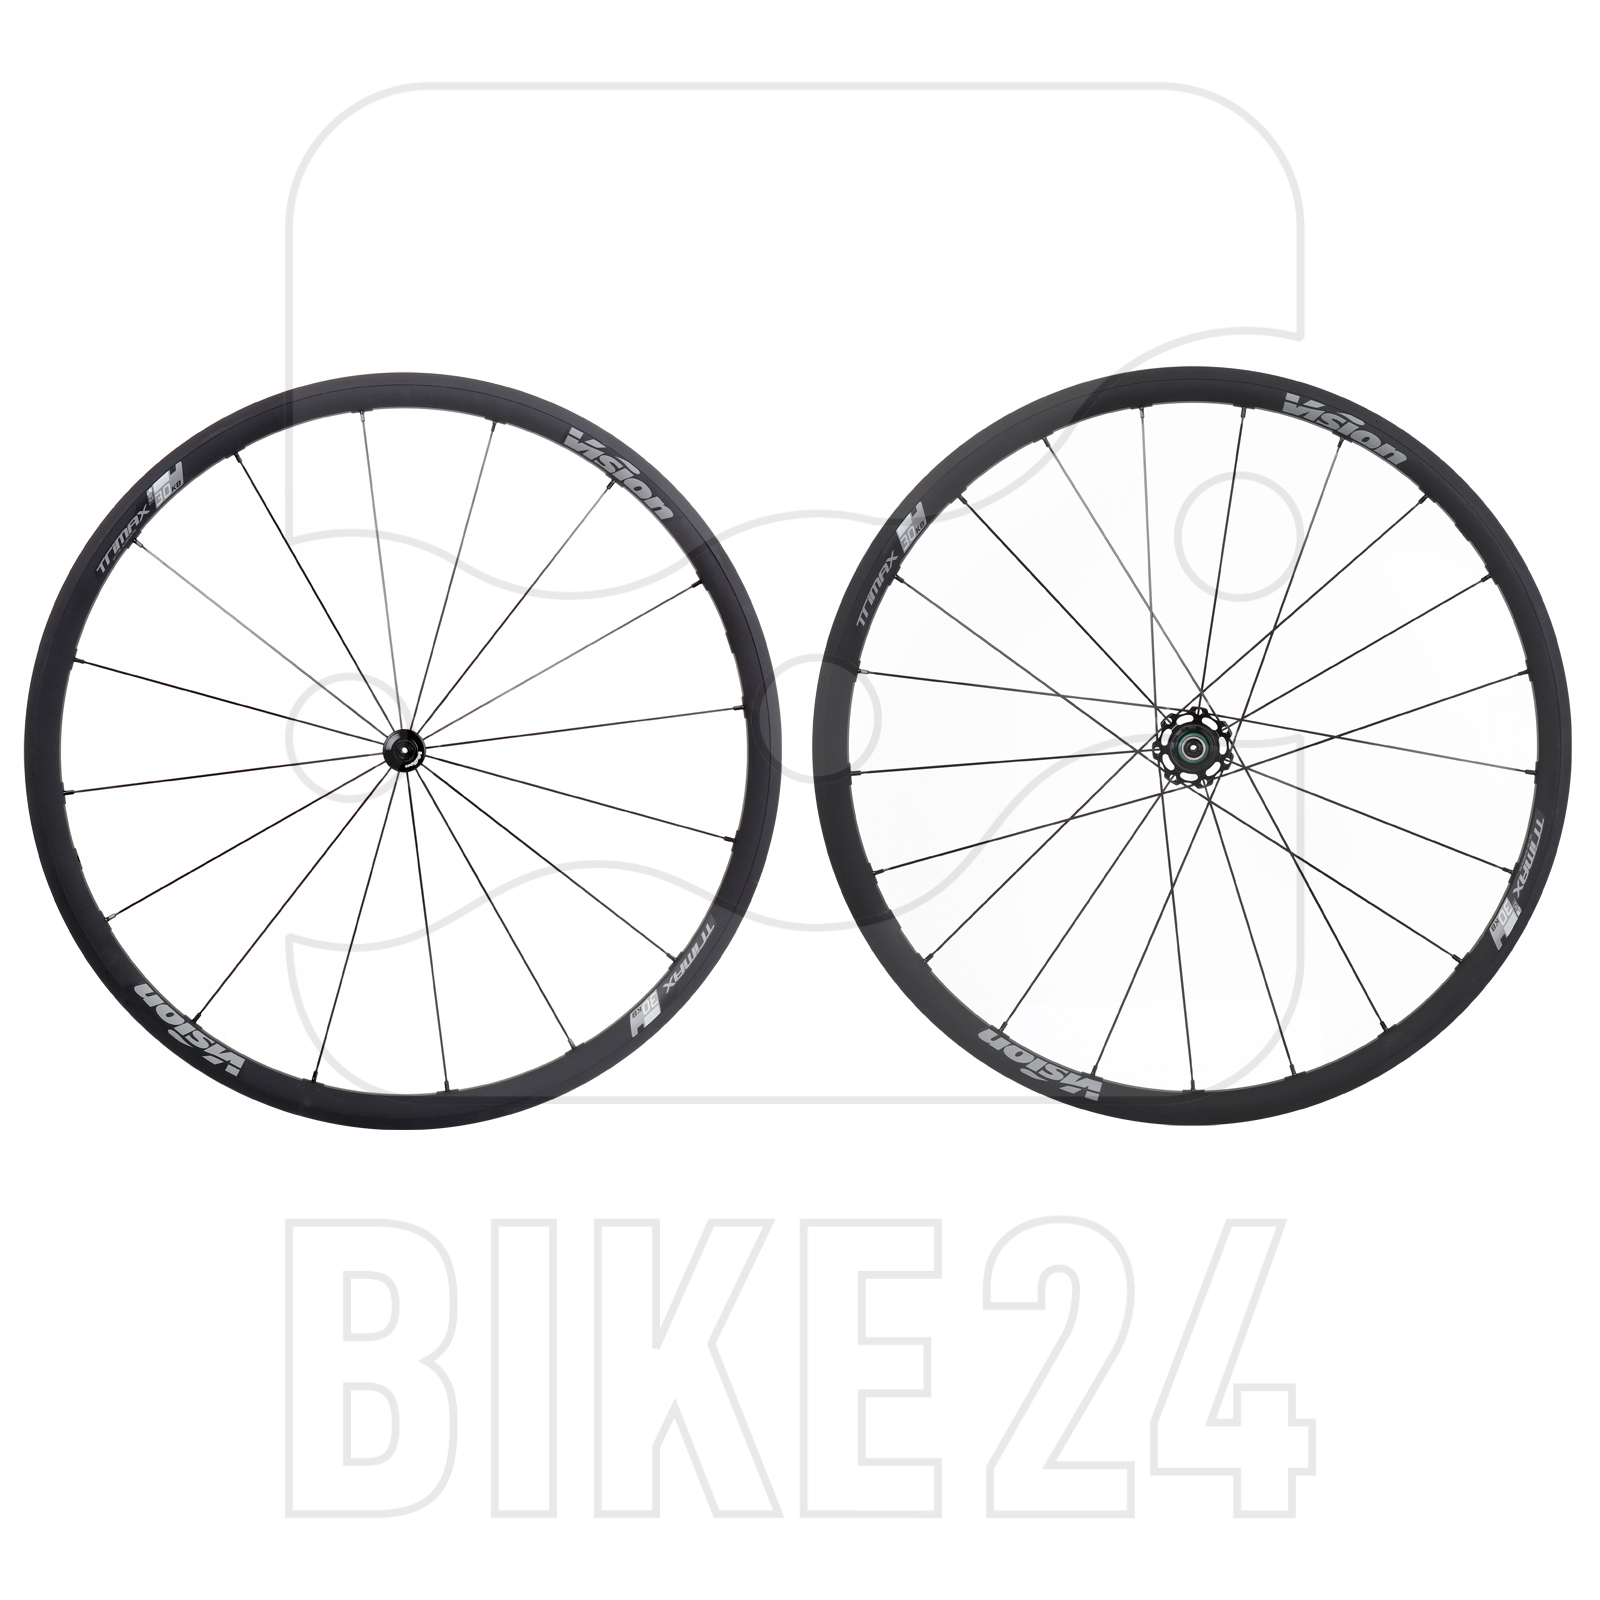 Vision TriMax 30 KB Wheelset - Tubeless Ready - Clincher - SRAM XDR